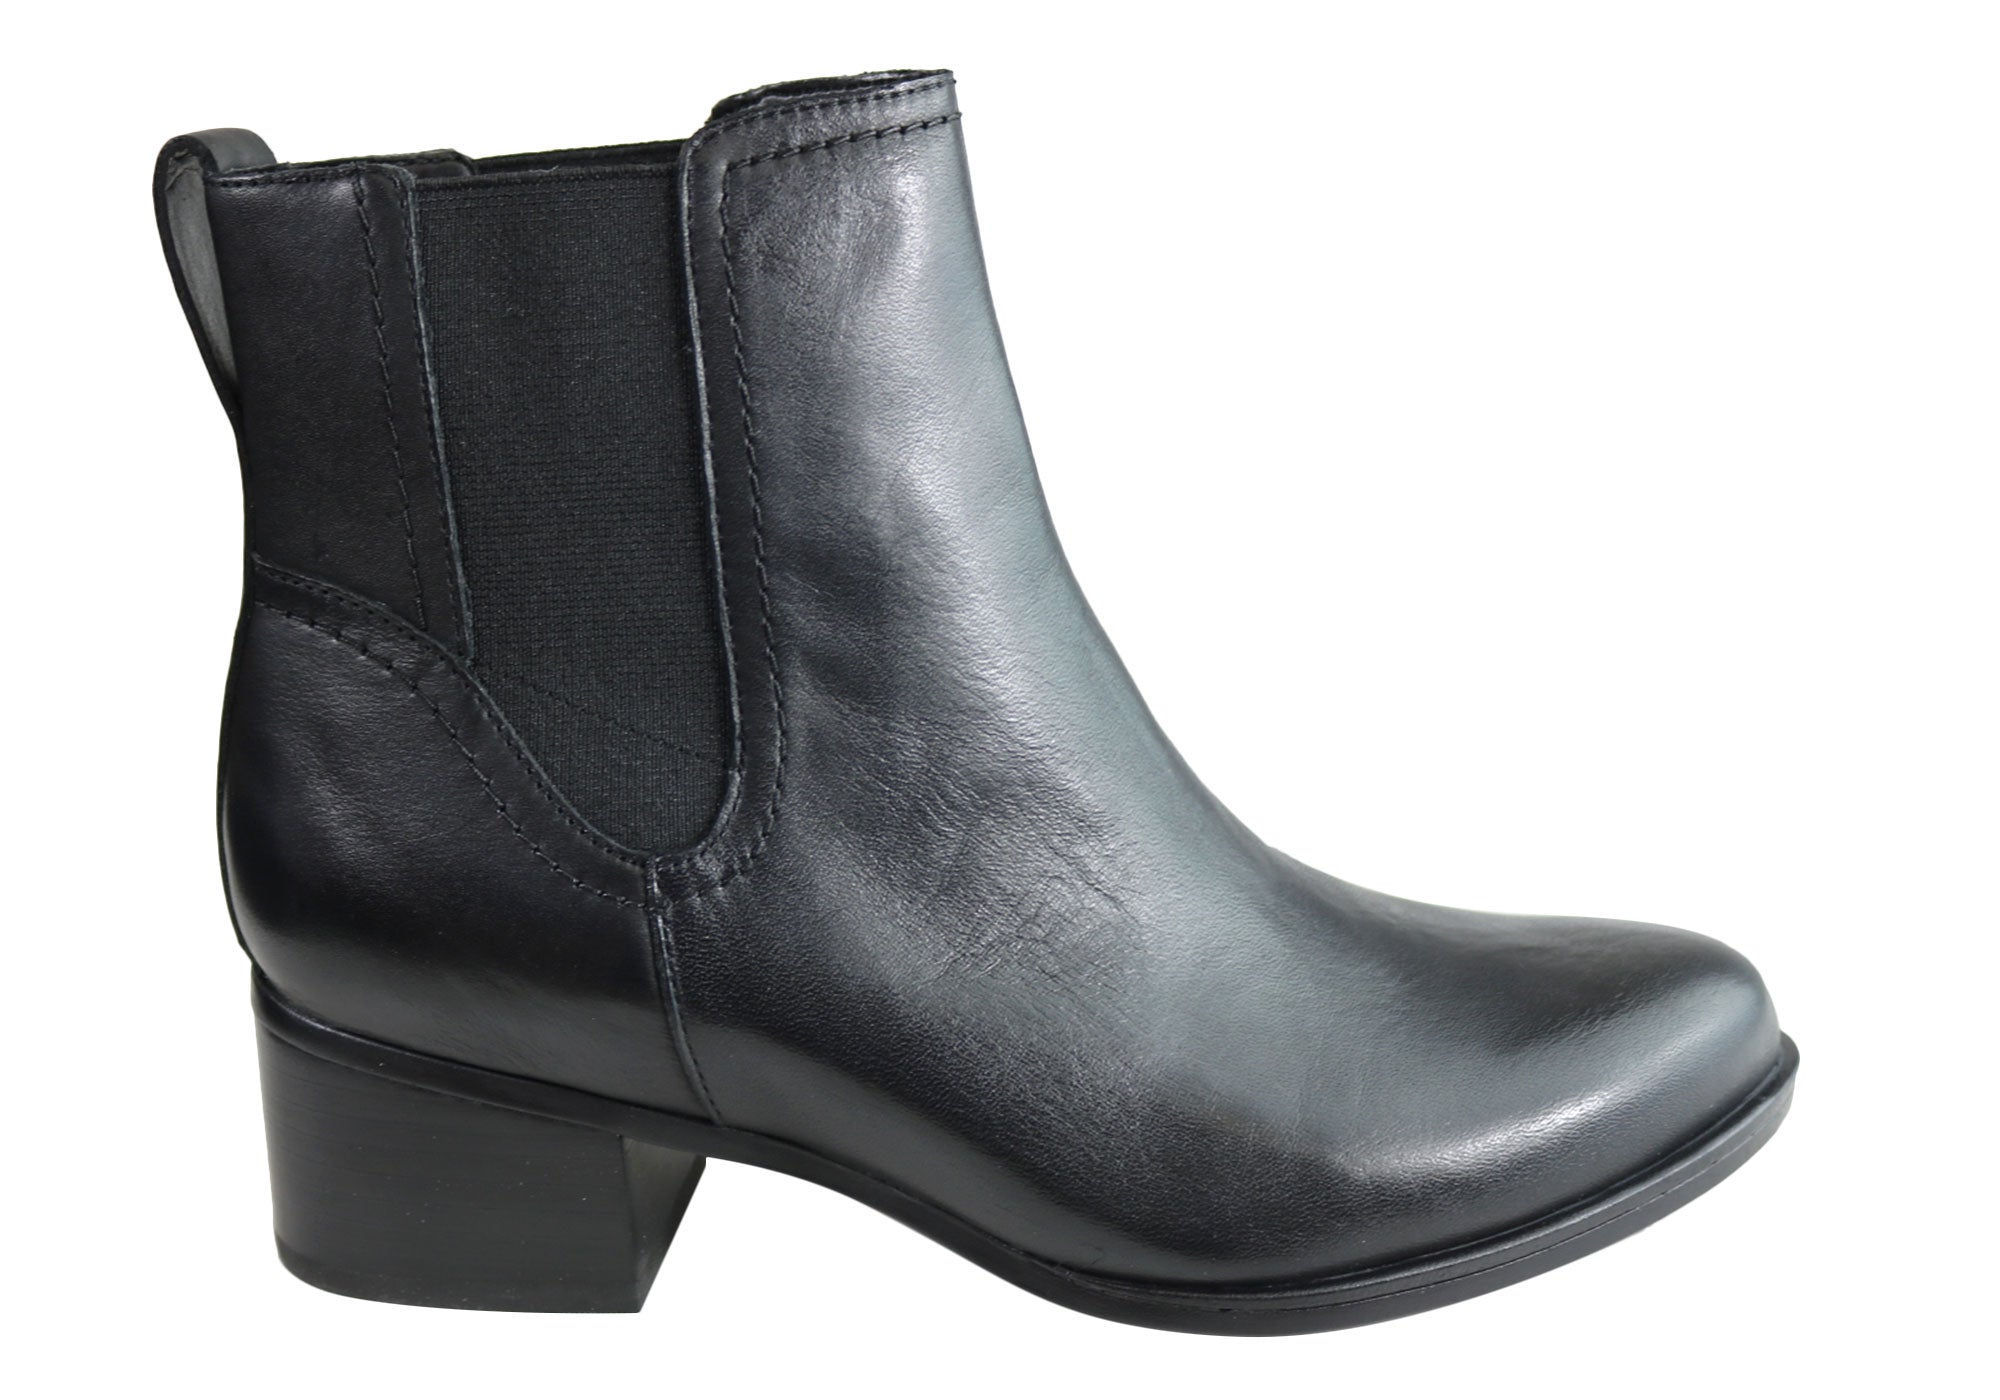 womens black leather ankle boots low heel